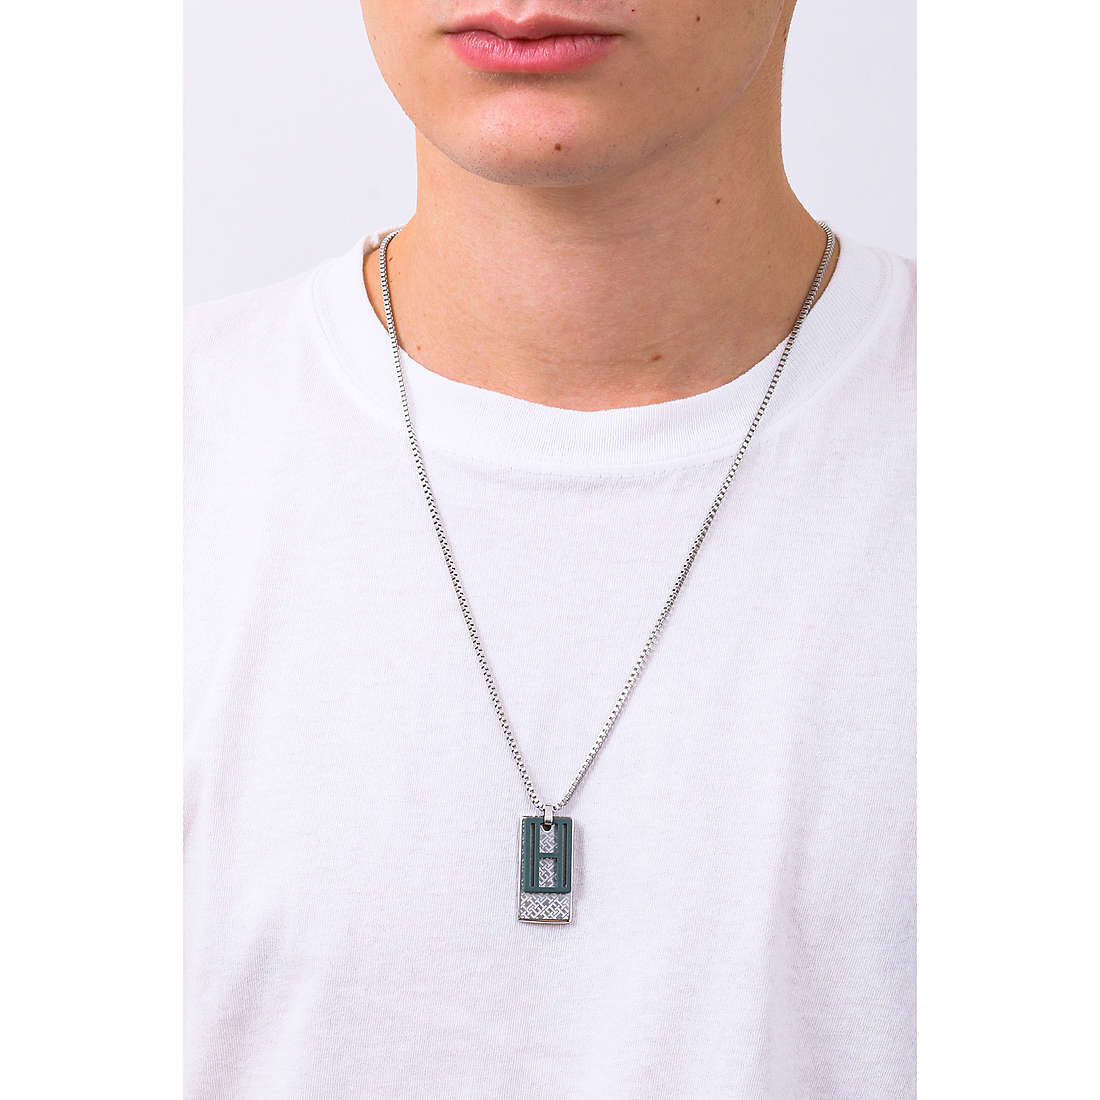 Tommy Hilfiger necklaces Anthony Ramos Capsule man 2790450 wearing